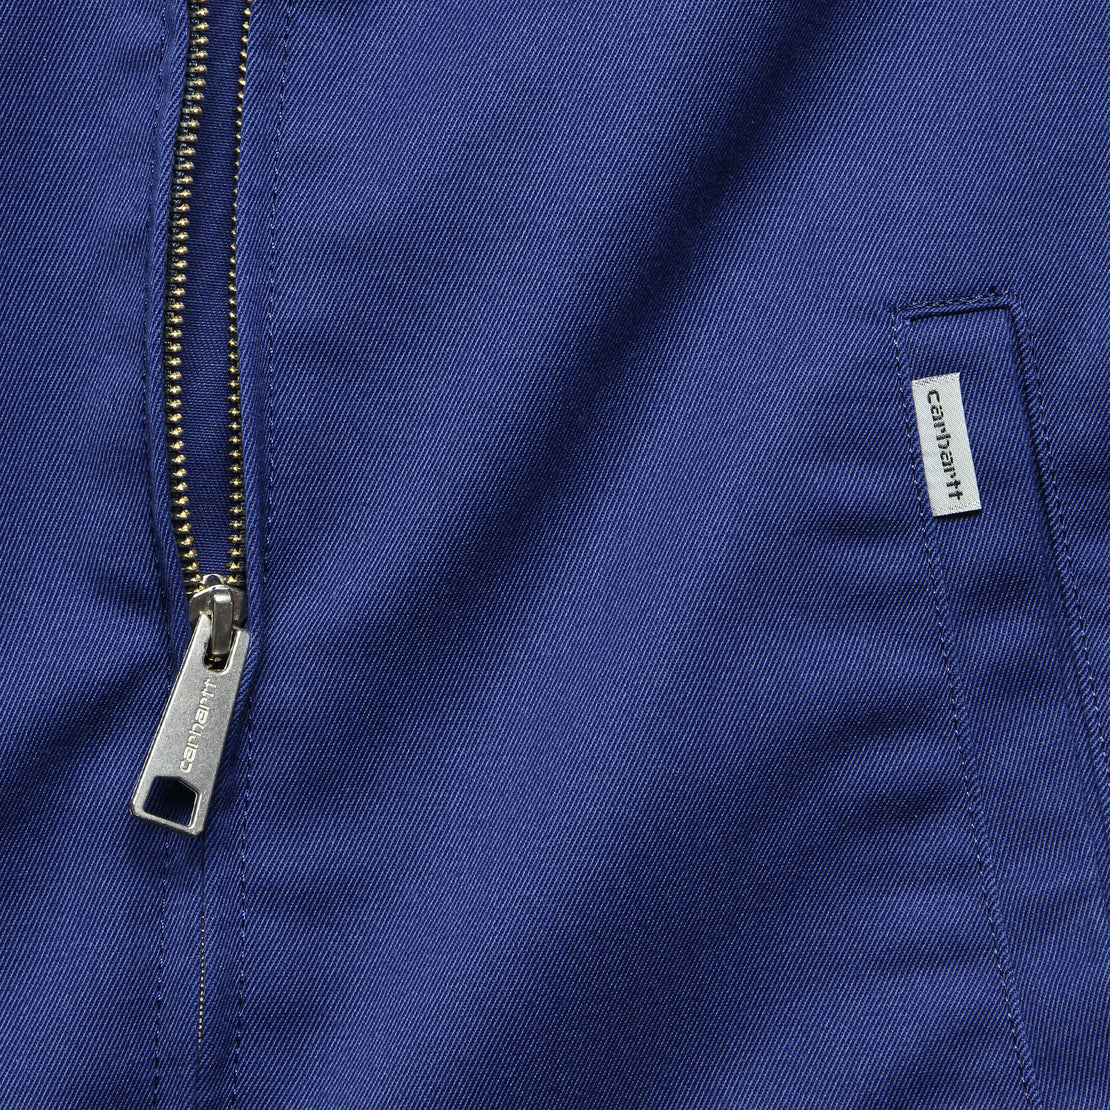 Modular Jacket - Metro Blue - Carhartt WIP - STAG Provisions - Outerwear - Coat / Jacket